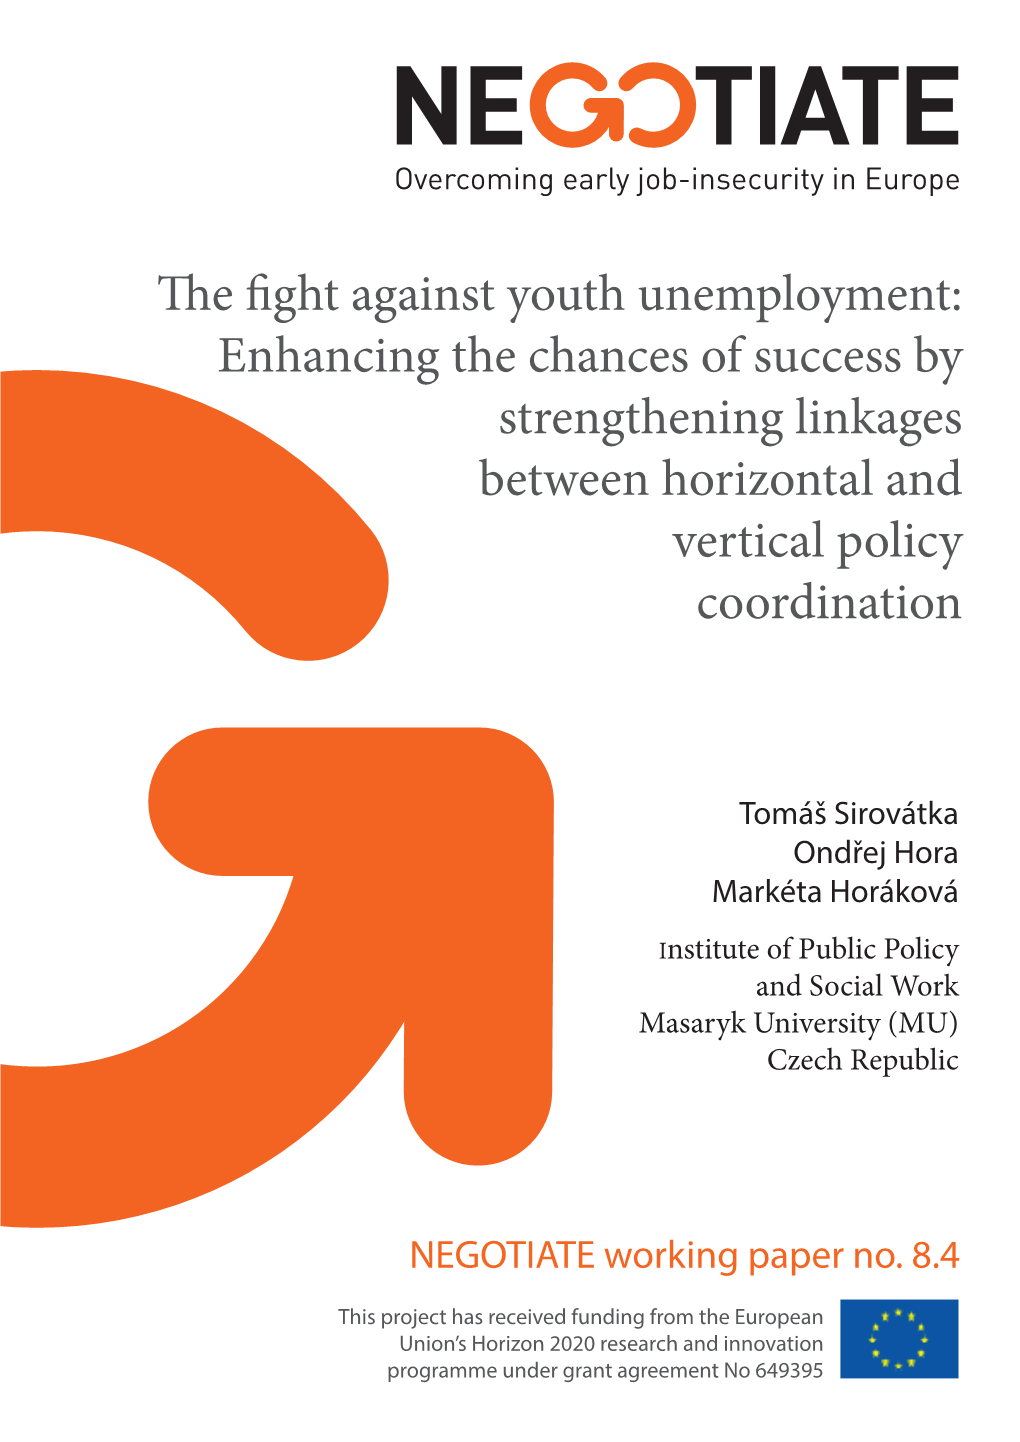 The Fight Against Youth Unemployment: Enhancing the Chances of Success by Strengthening Linkages Between Horizontal and Vertical Policy Coordination